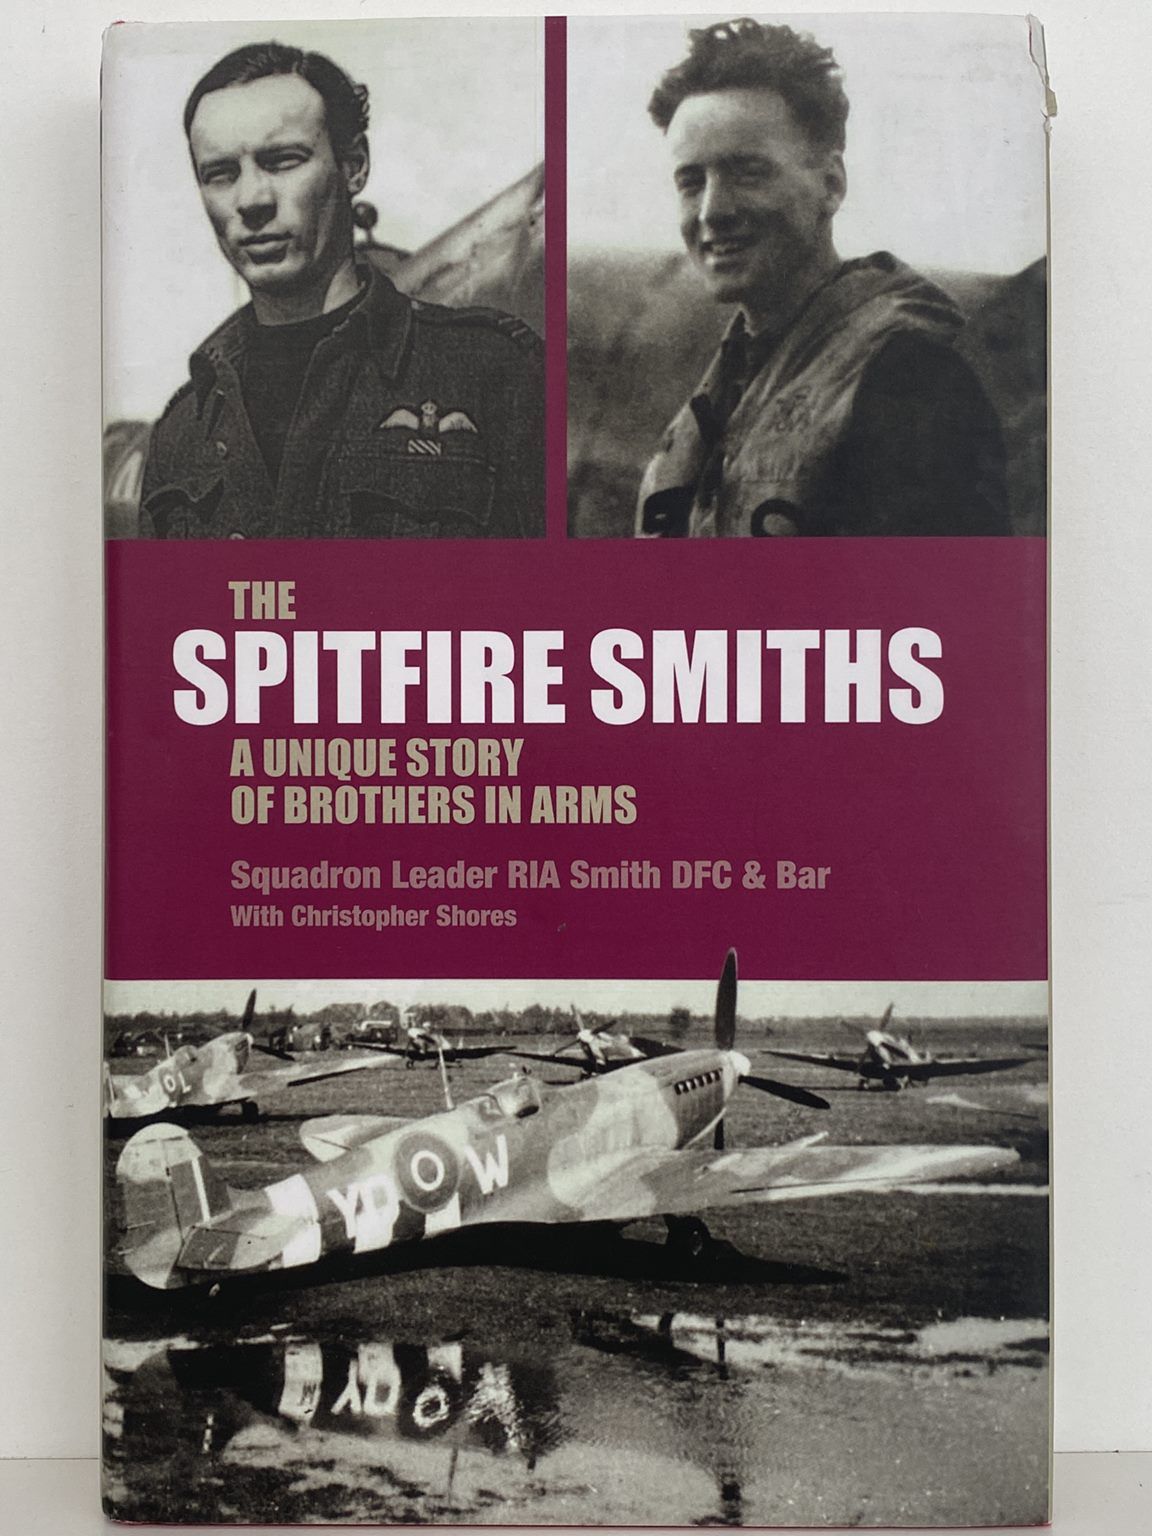 SPITFIRE SMITHS: A Unique Story of Brothers in Arms - Squadron Leader RIA Smith